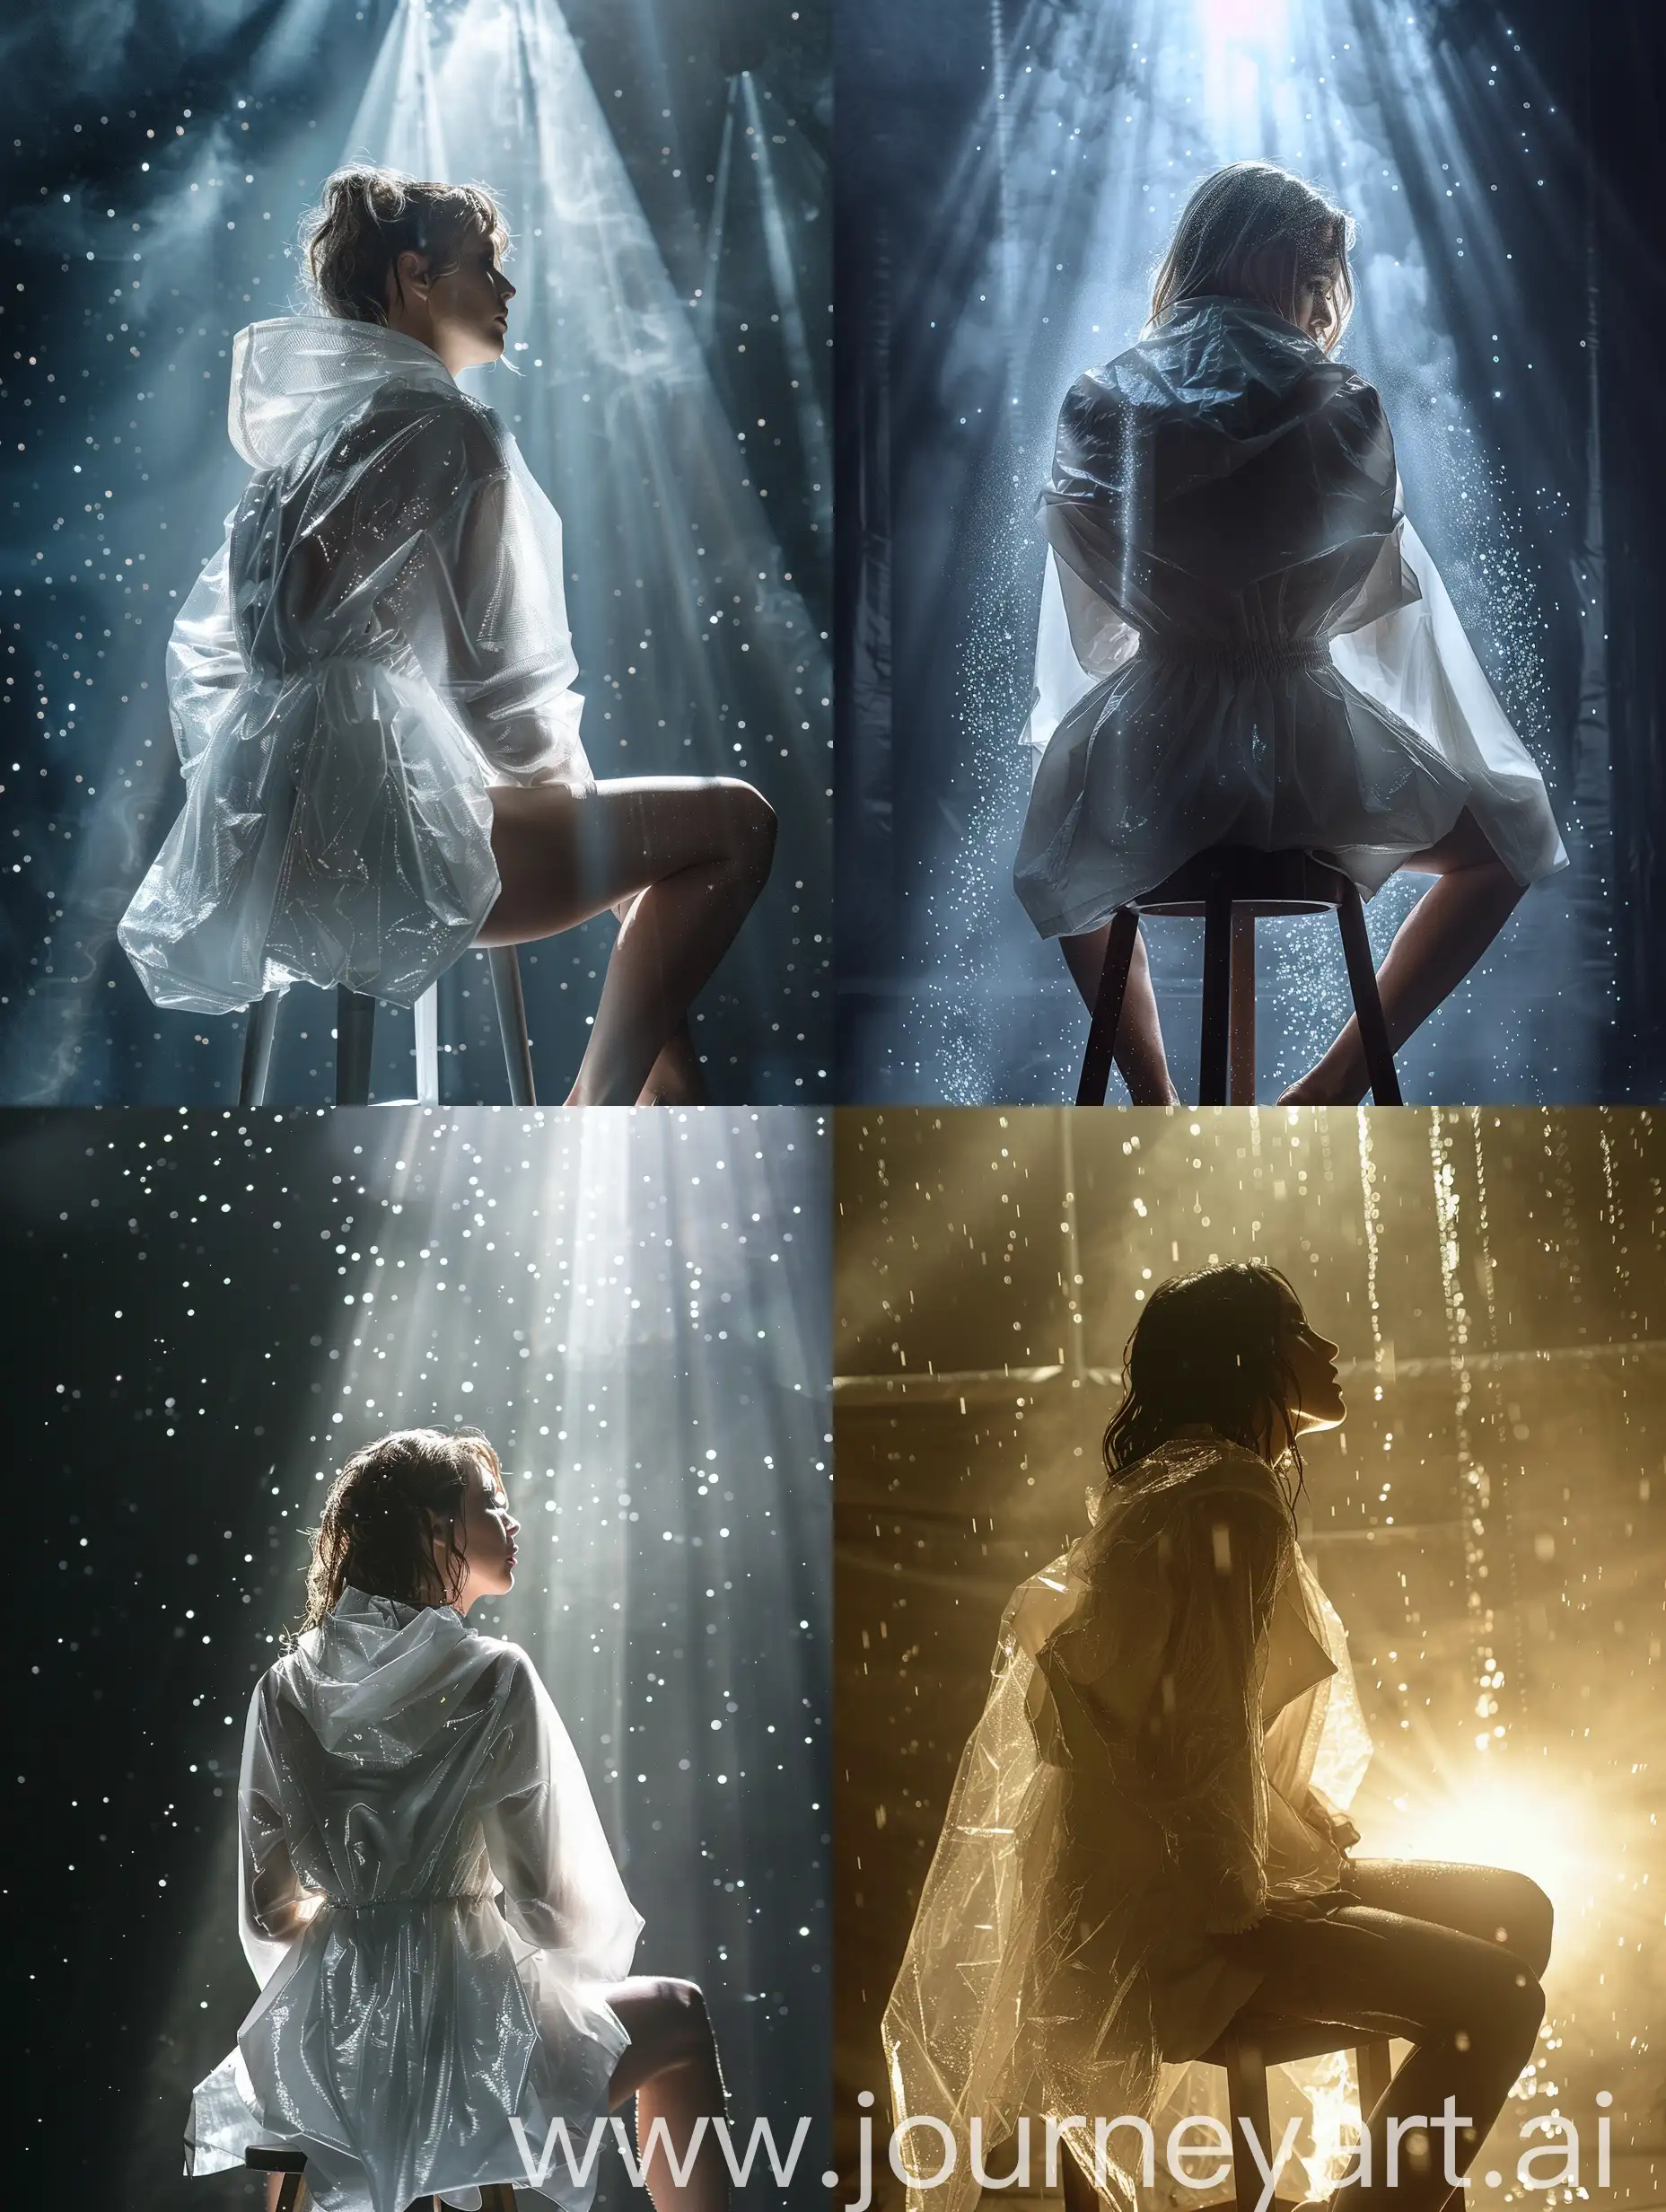 a woman in a white dress sitting on a stool, by Aleksander Gierymski, shutterstock, light and space, water is made of stardust, backlit girl in raincoat, production photo, show from below, dusty volumetric lighting, kylie minogue, lighting 8k, bottom angle, high-quality photo, no words 4 k, show light
Start again
Share